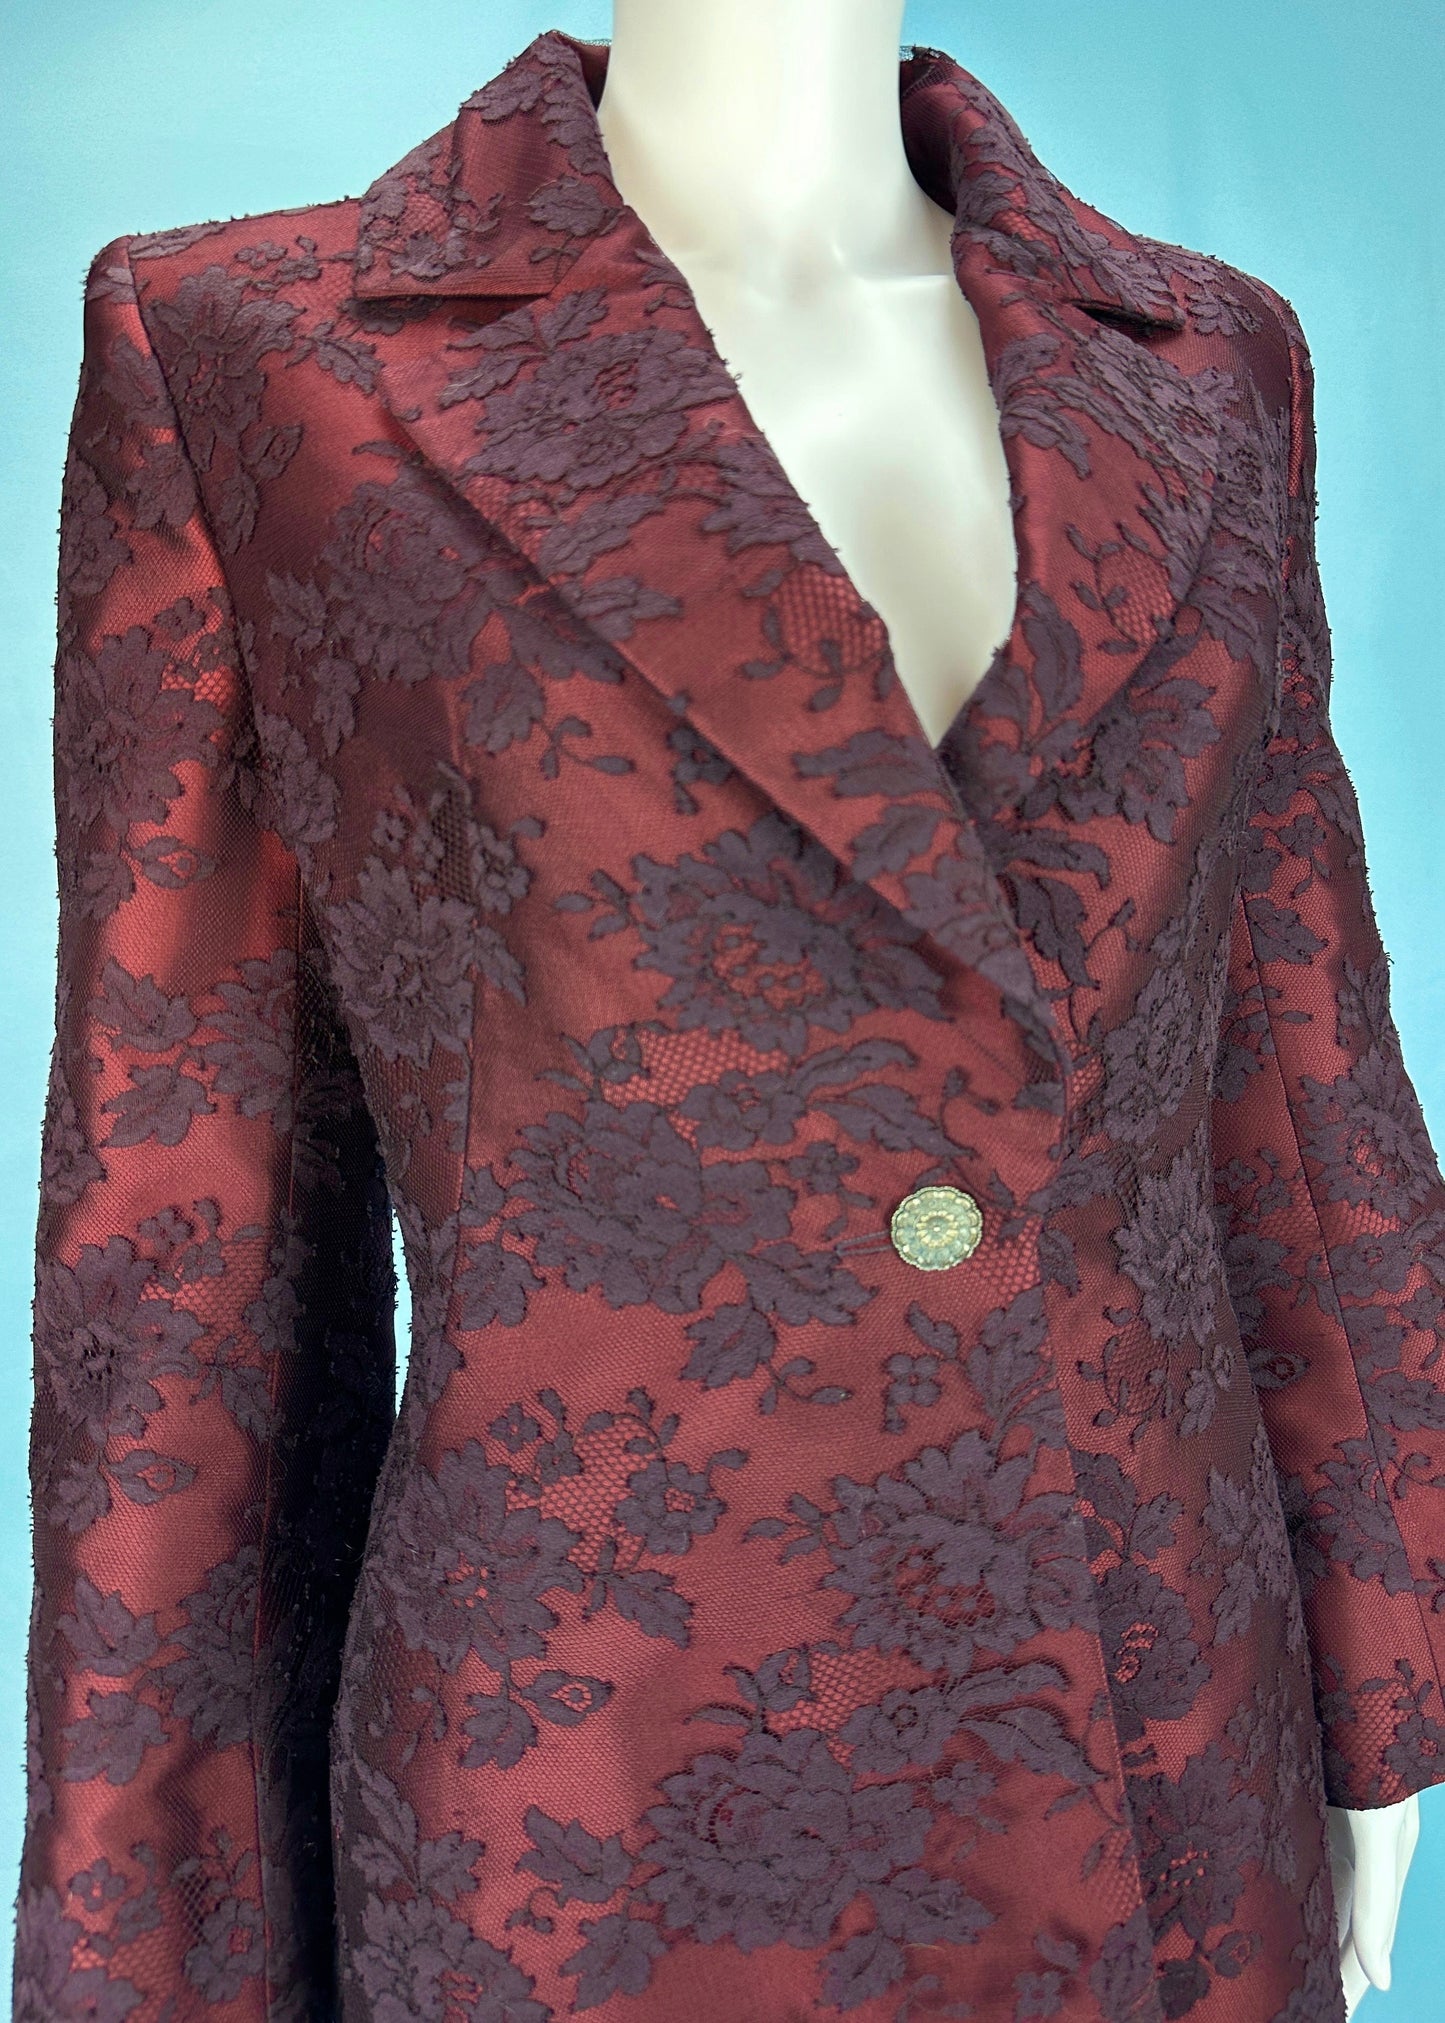 Givenchy Couture by Alexander McQueen Fall 1998 Red Silk Lace Jacket